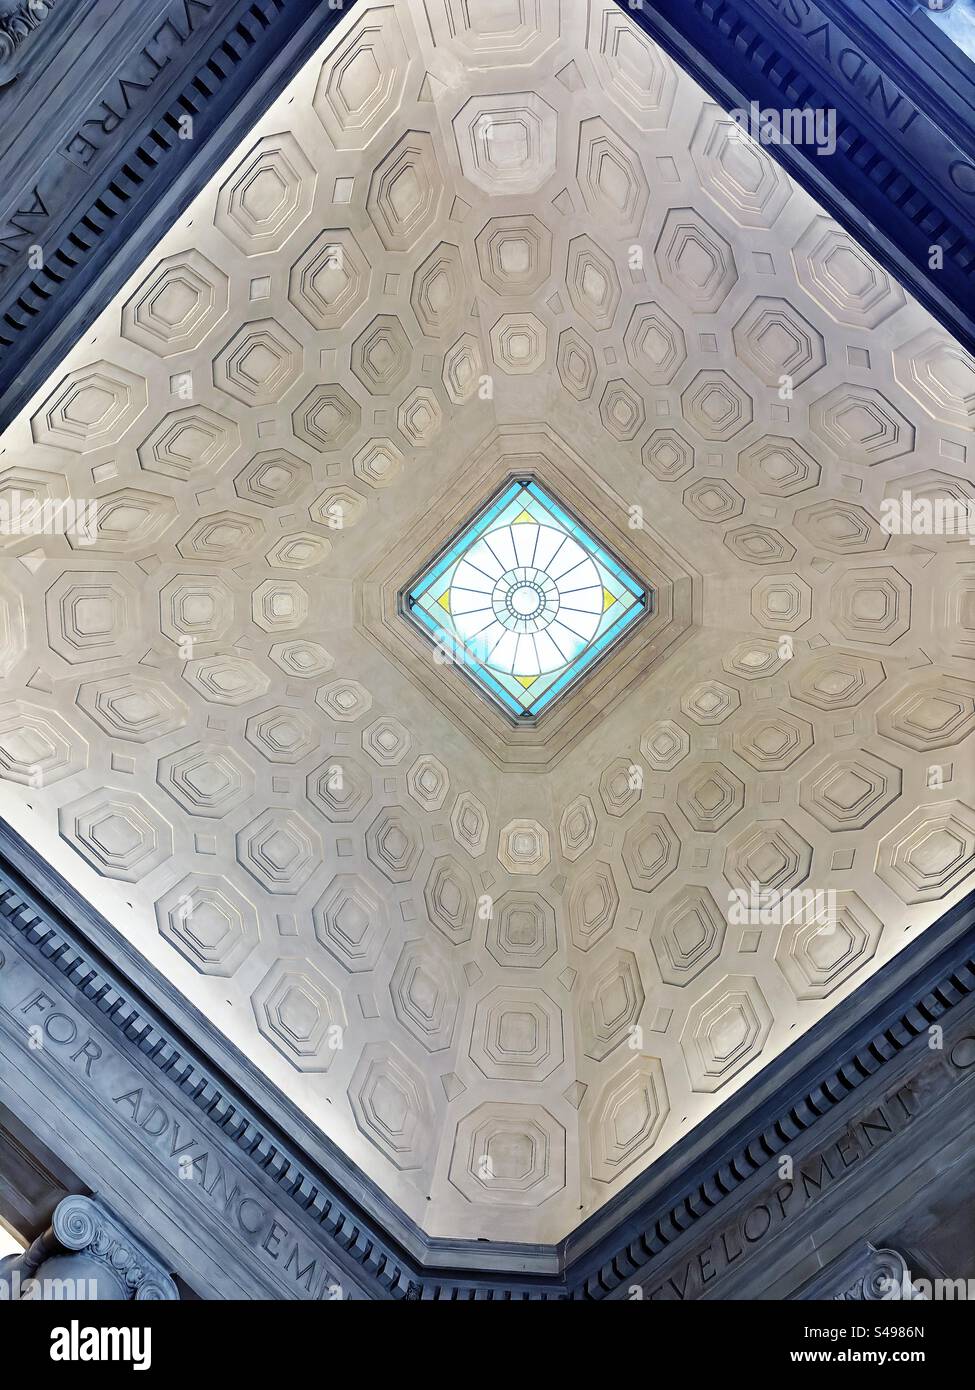 Cambridge, Massachusetts, USA - Interior dome and ceiling of main entryway in Rogers Building (Building 7) on Massachusetts Institute of Technology (MIT) campus. Stock Photo